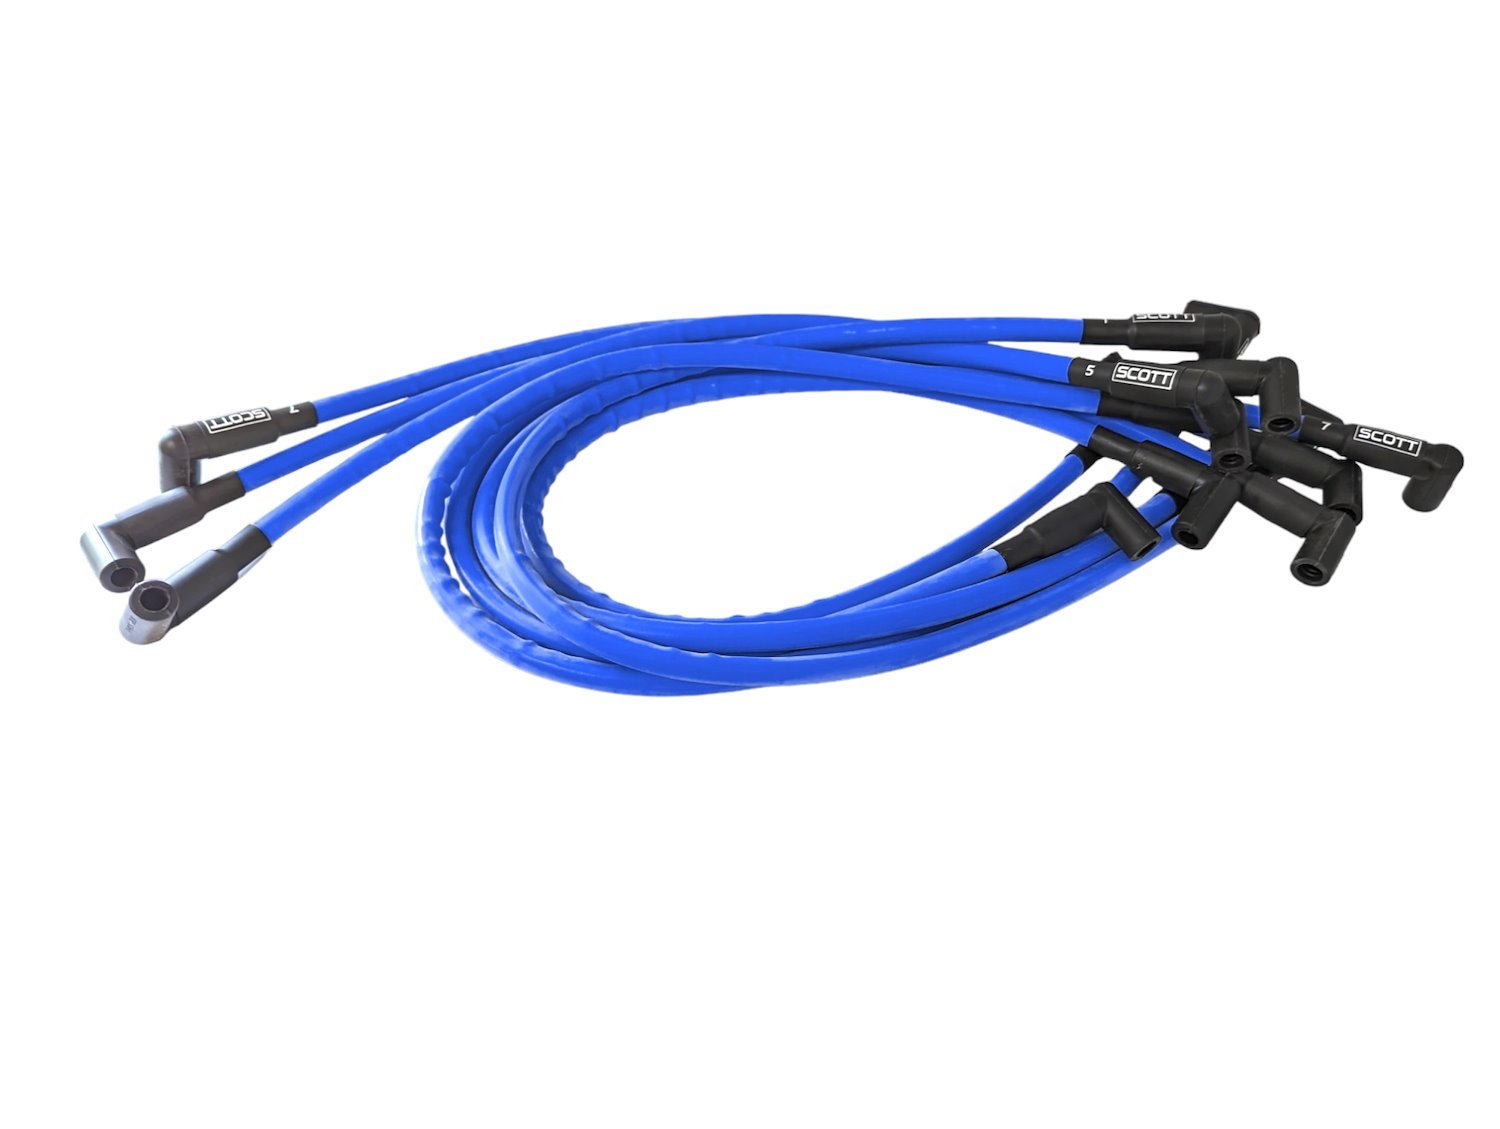 SPW-CH-437-4 High-Performance Silicone-Sleeved Spark Plug Wire Set for Small Block Chevy, Over & Under [Blue]